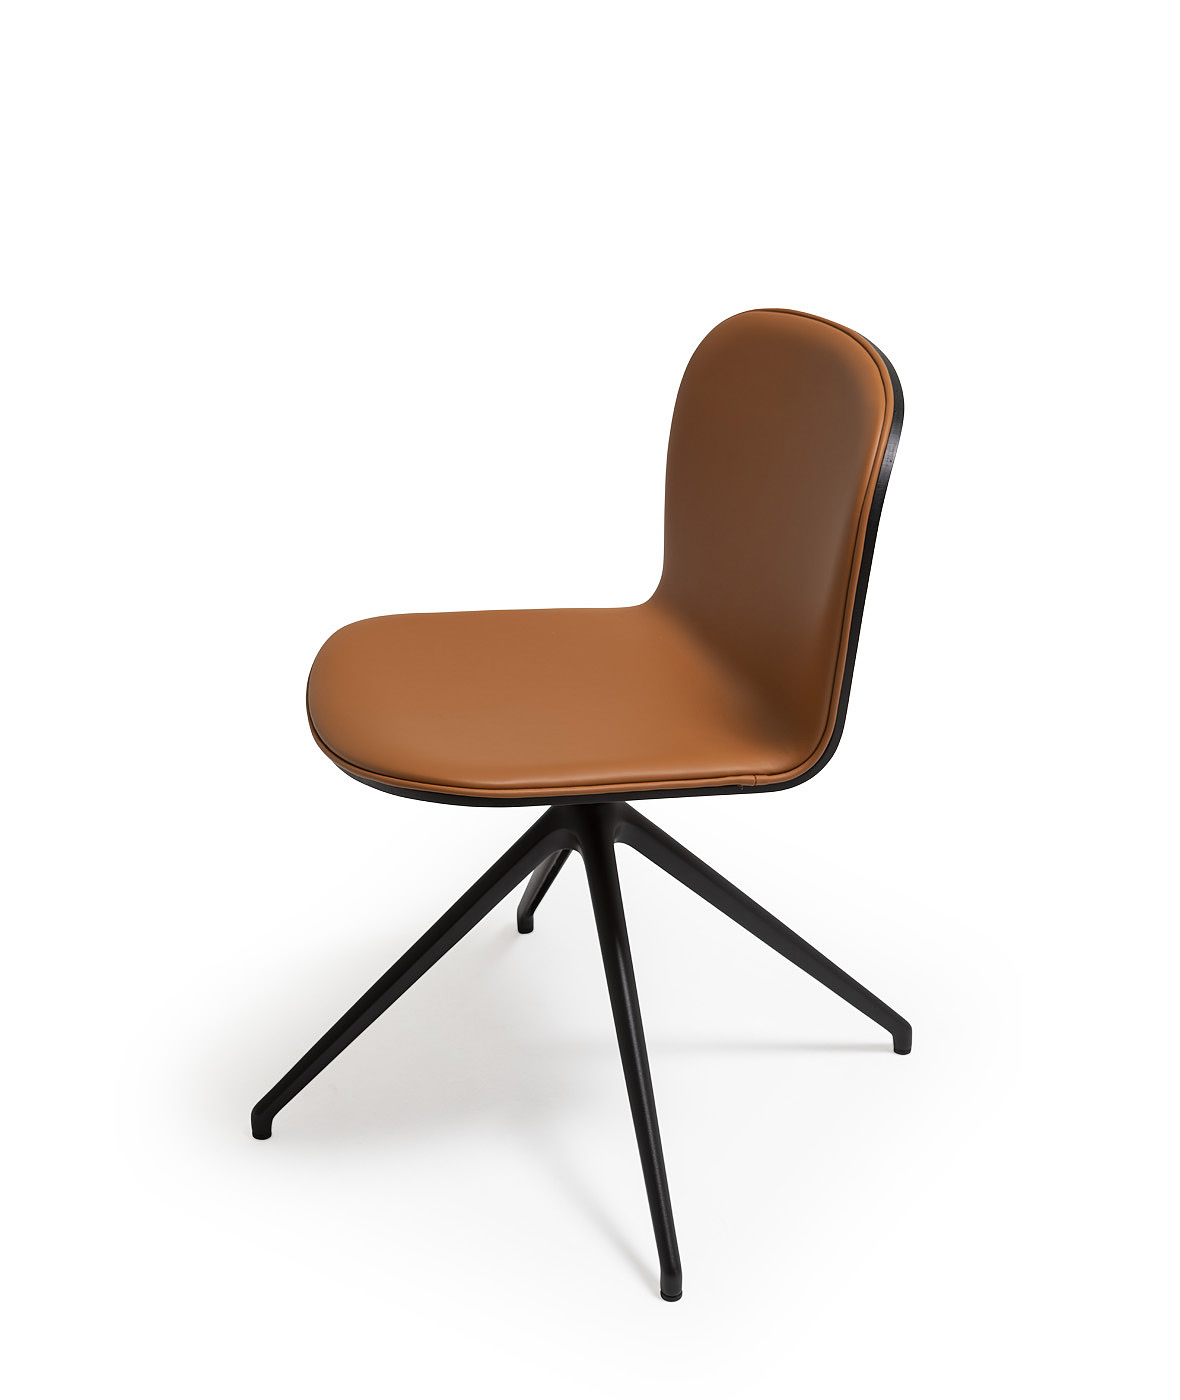 Ona chair with swivel base with 4 legs - Vergés